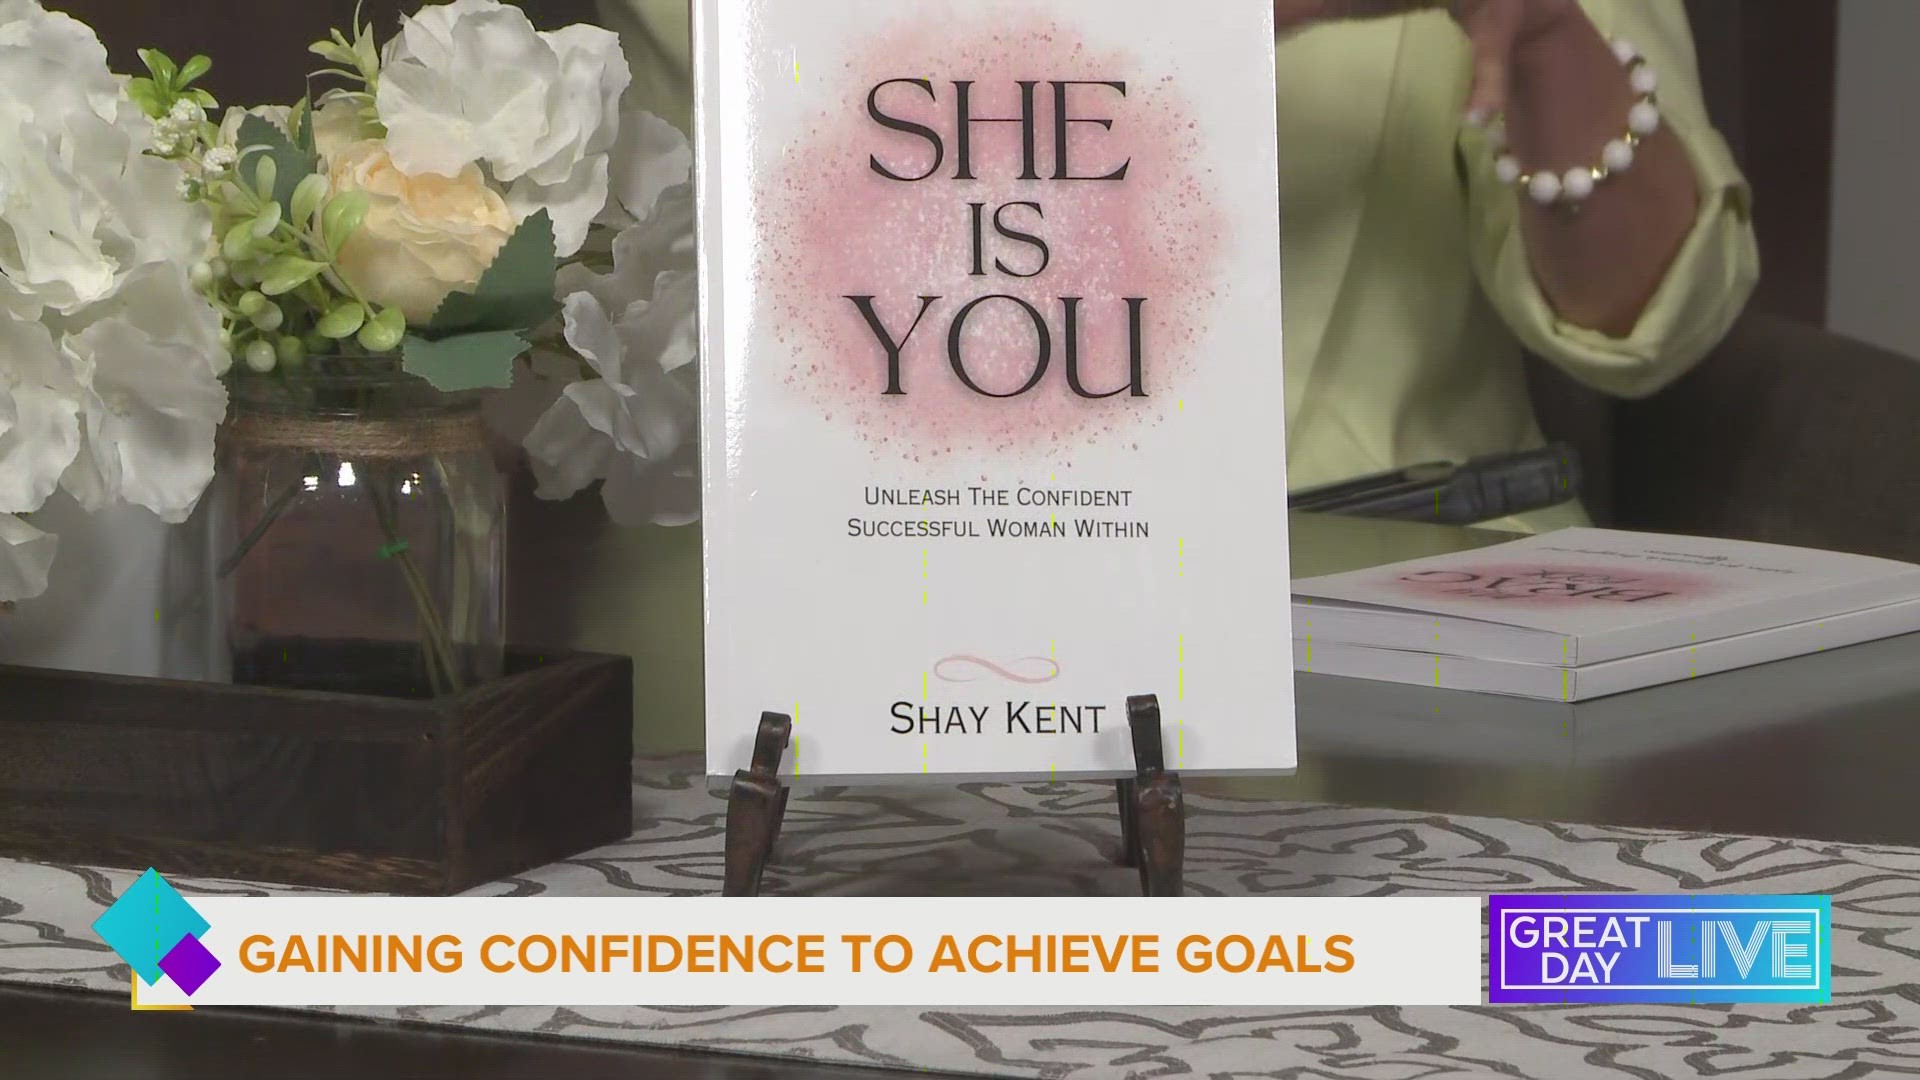 Author Shay Kent joins us to discuss her new book on how women can gain confidence to achieve their goals.